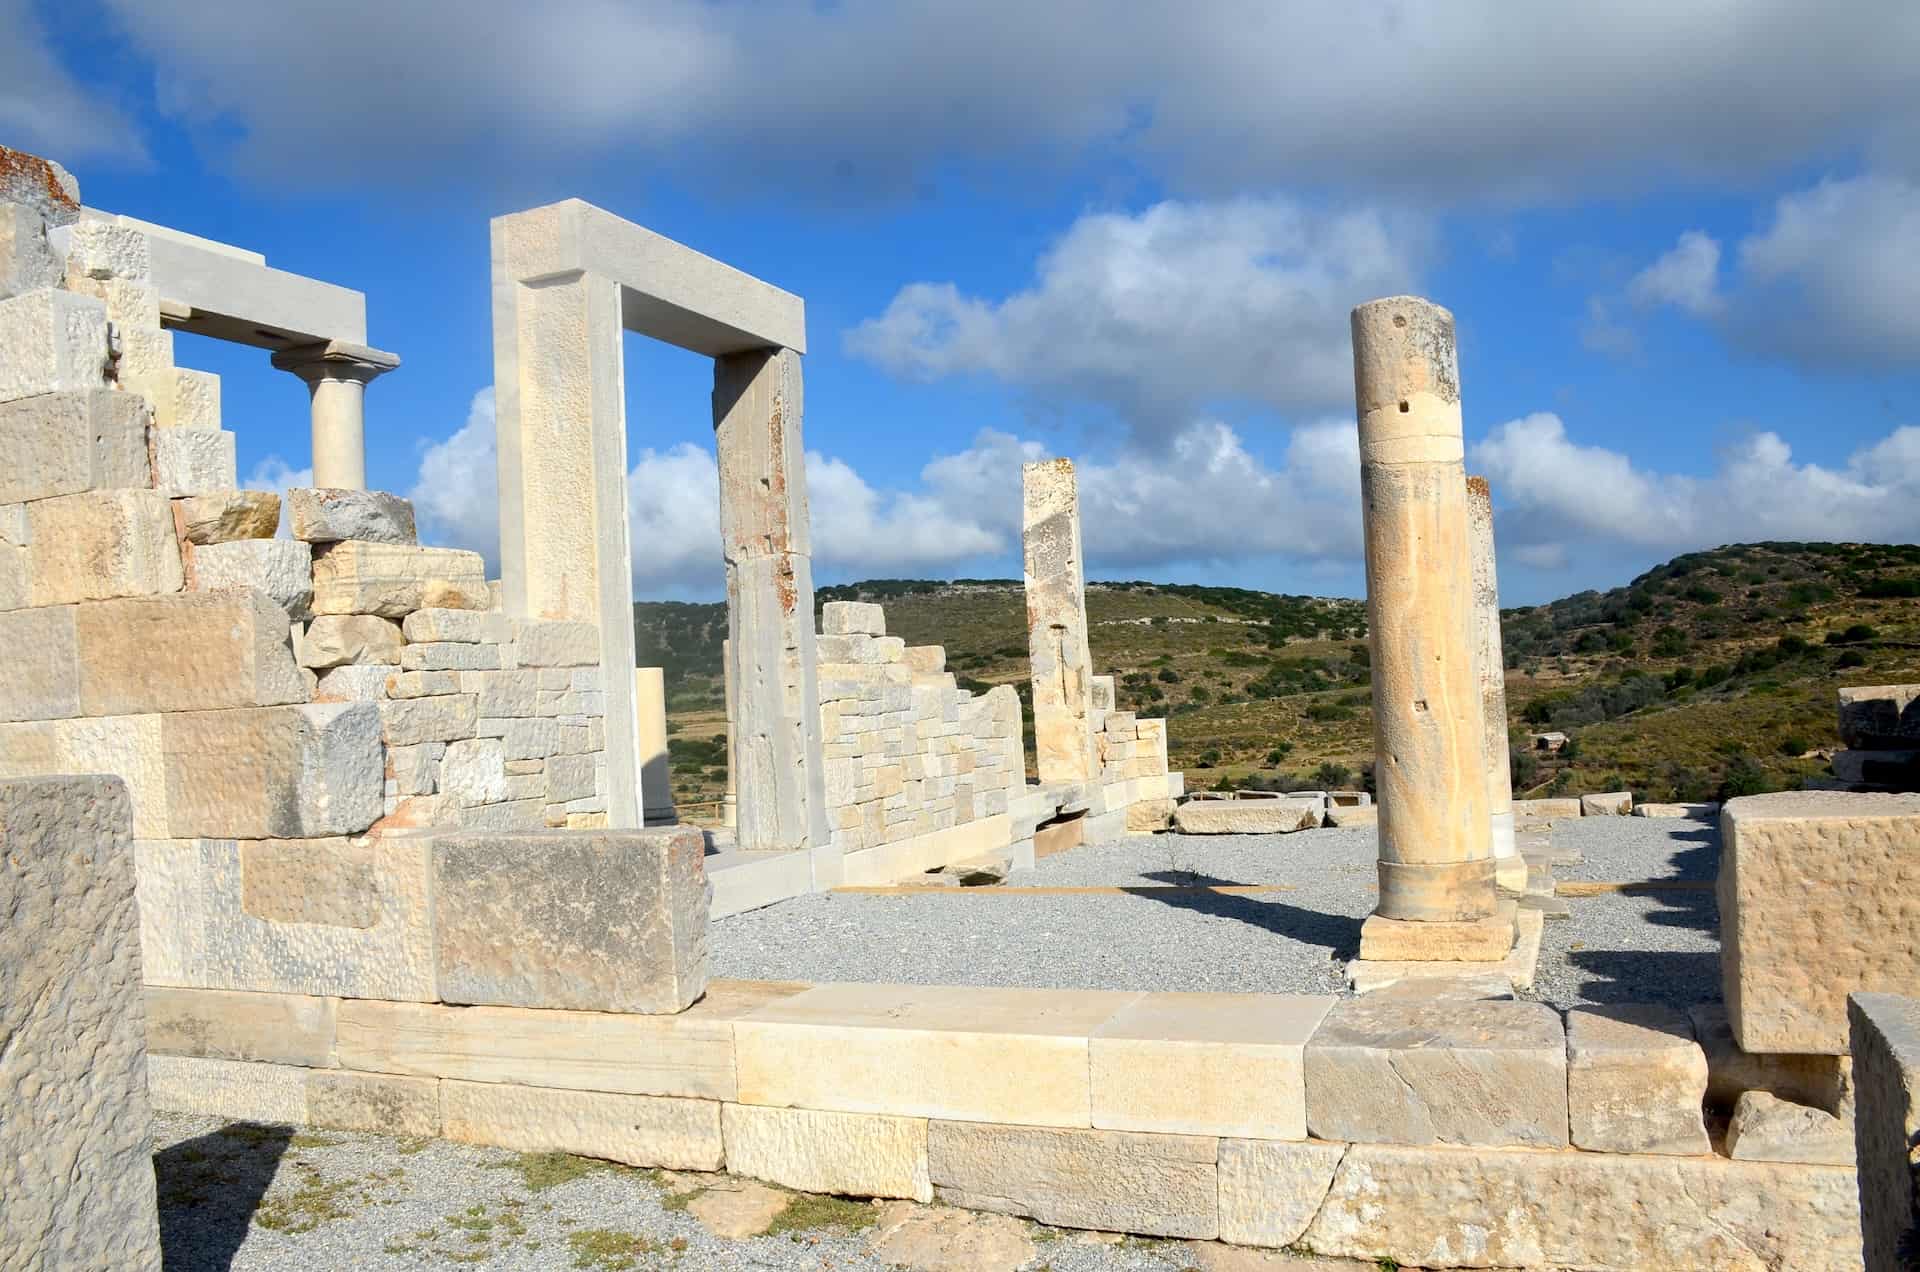 Cella of the Temple of Demeter in Naxos, Greece